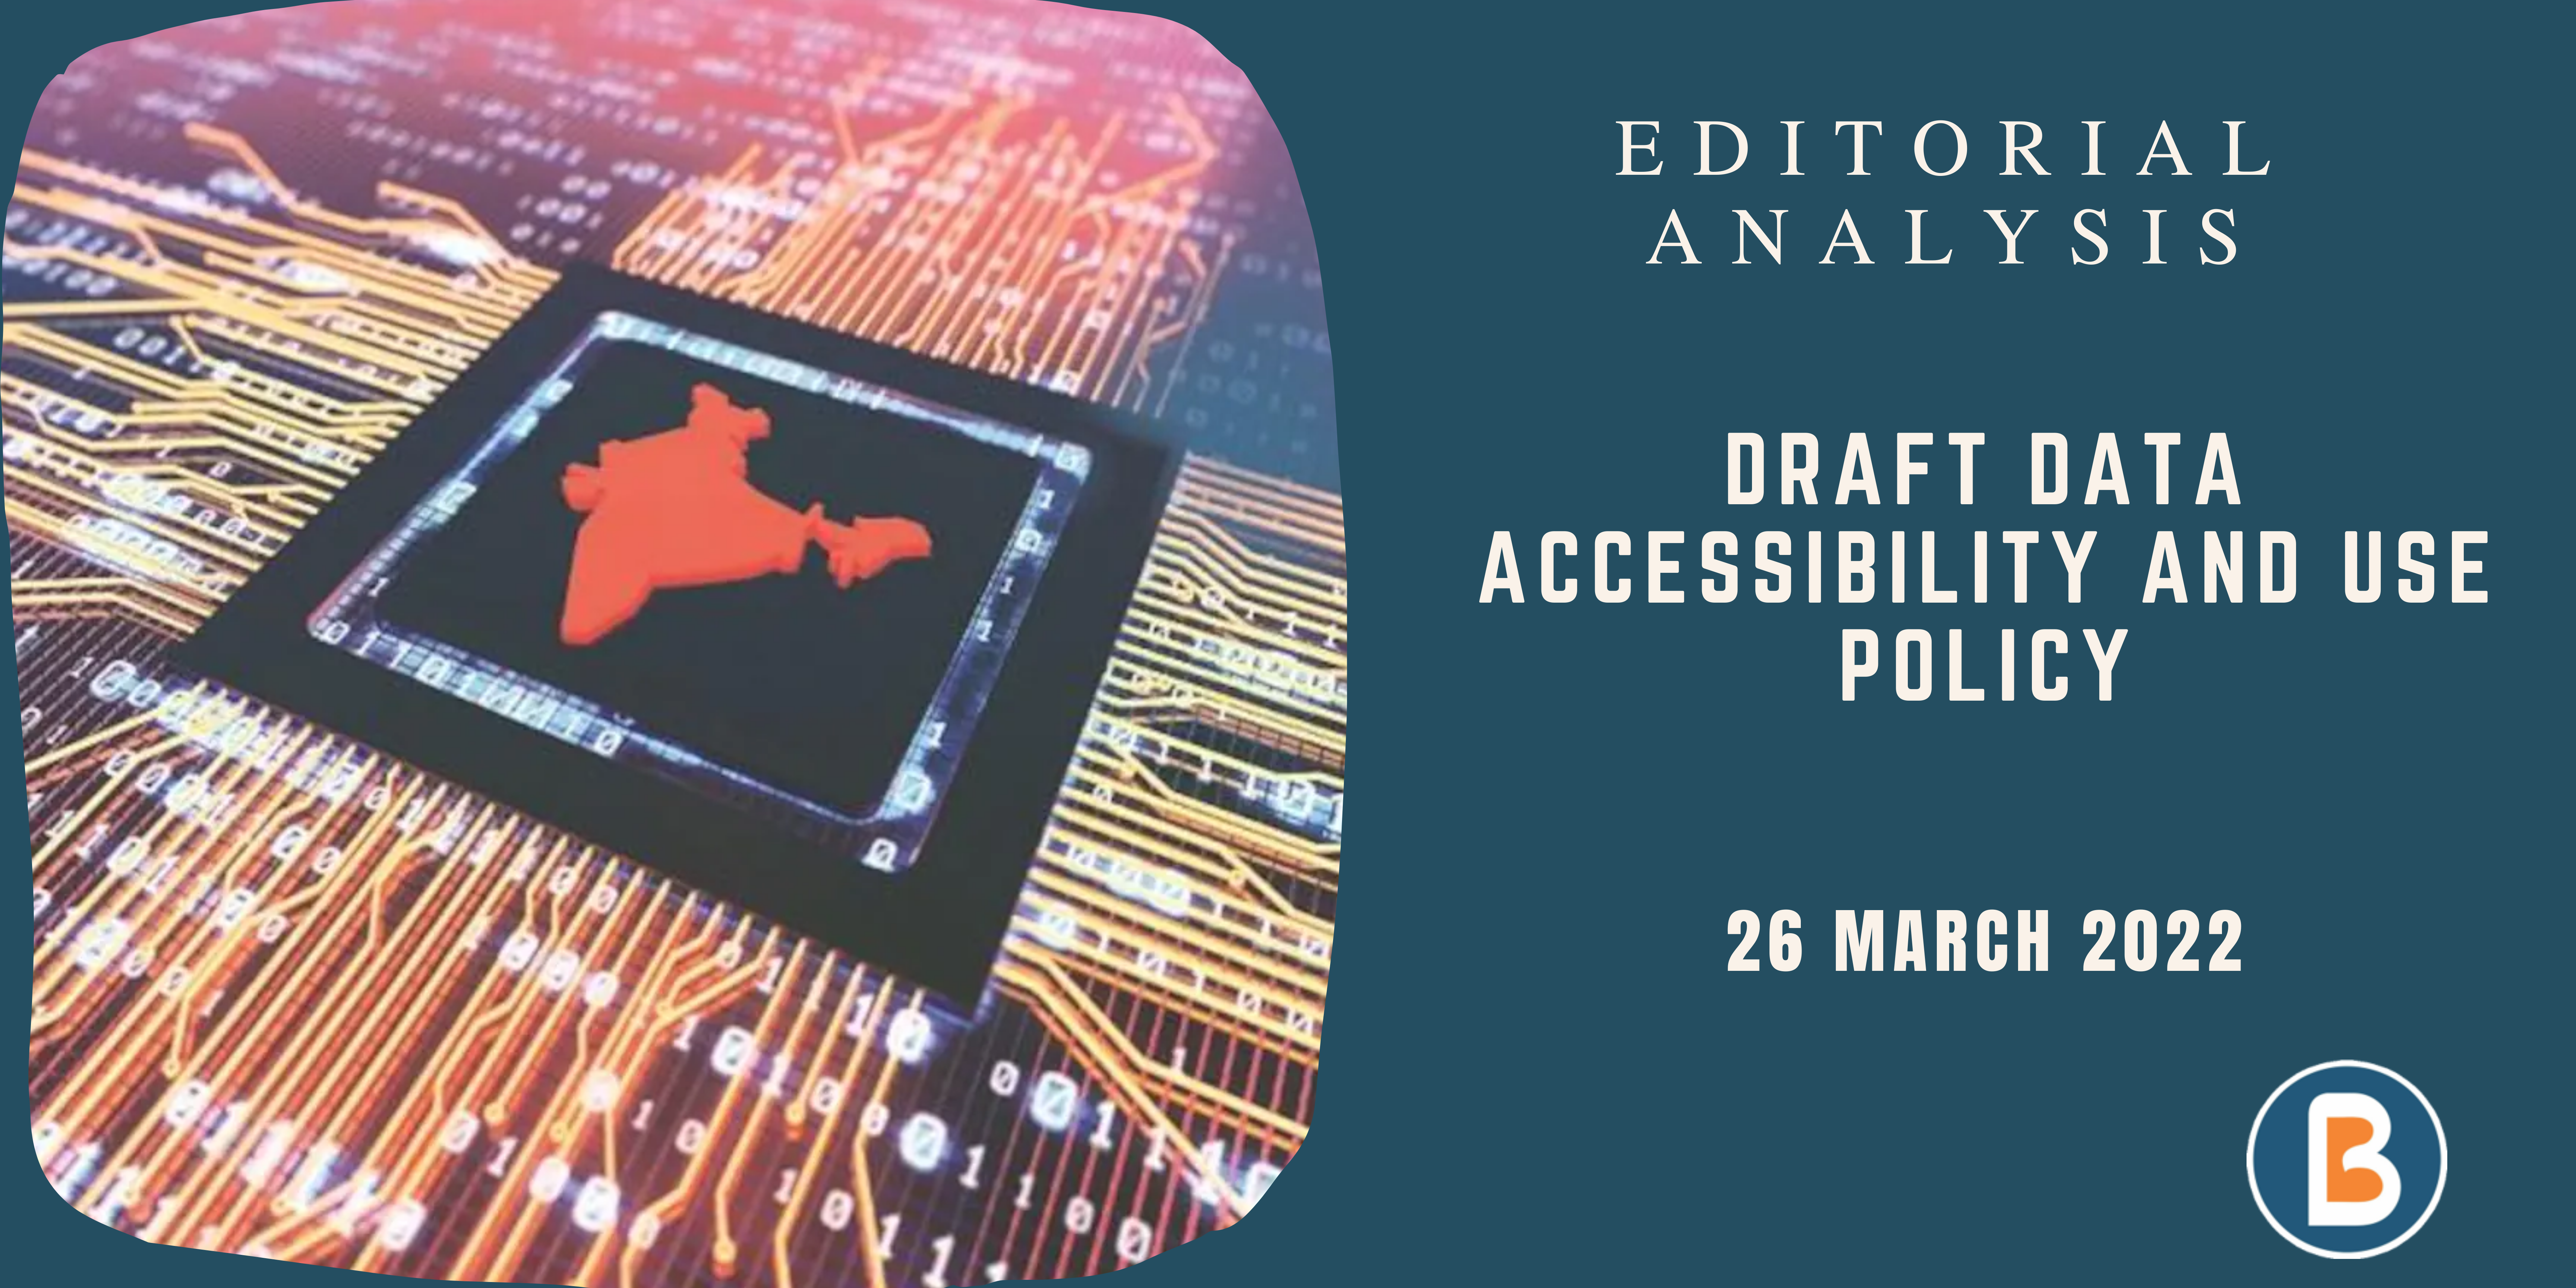 Editorial Analysis for UPSC - Draft data accessibility and use policy